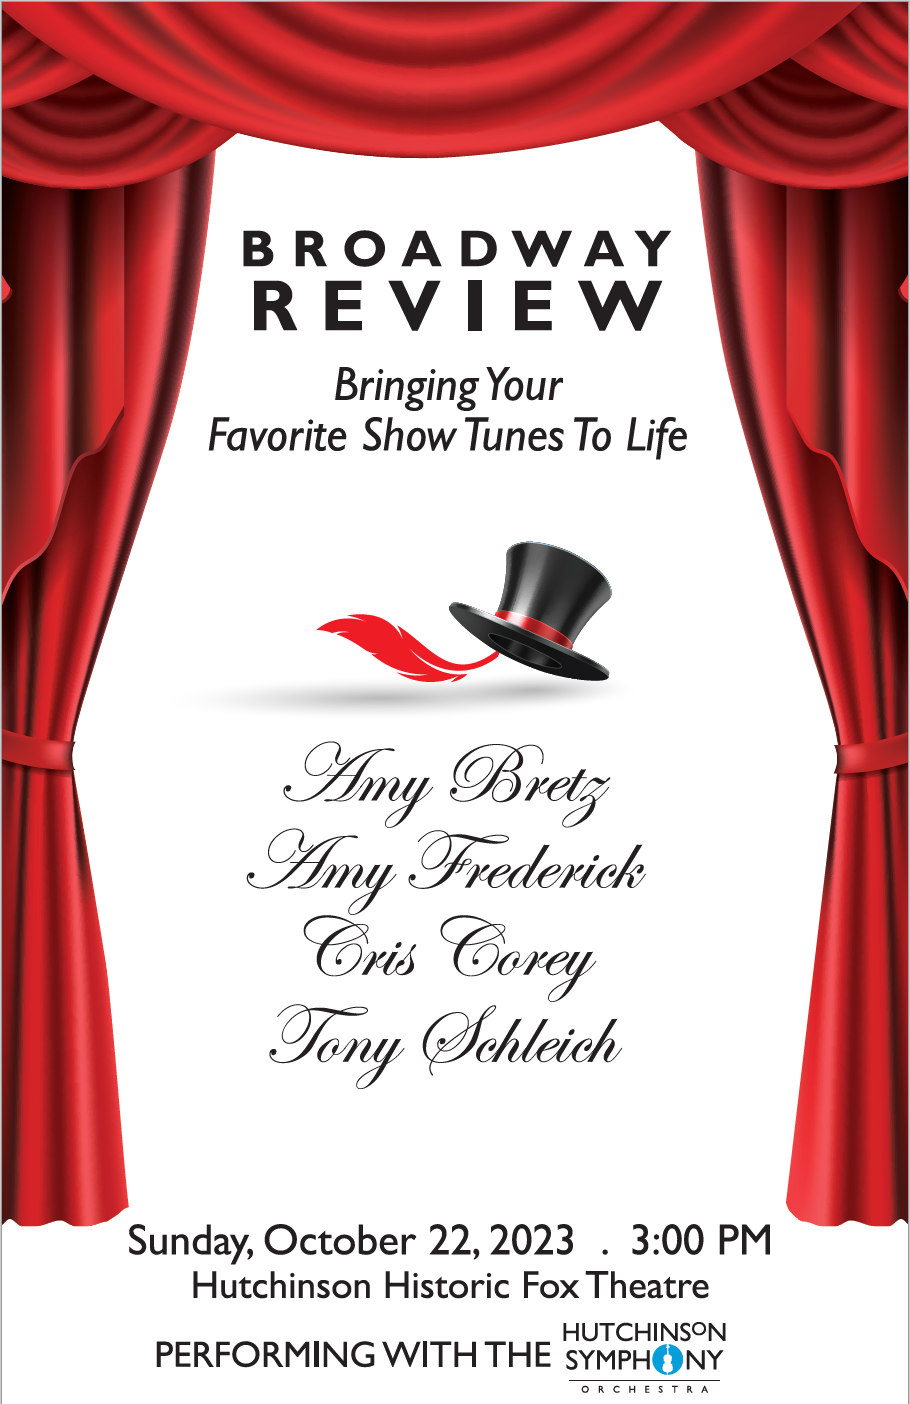 A broadway review graphic